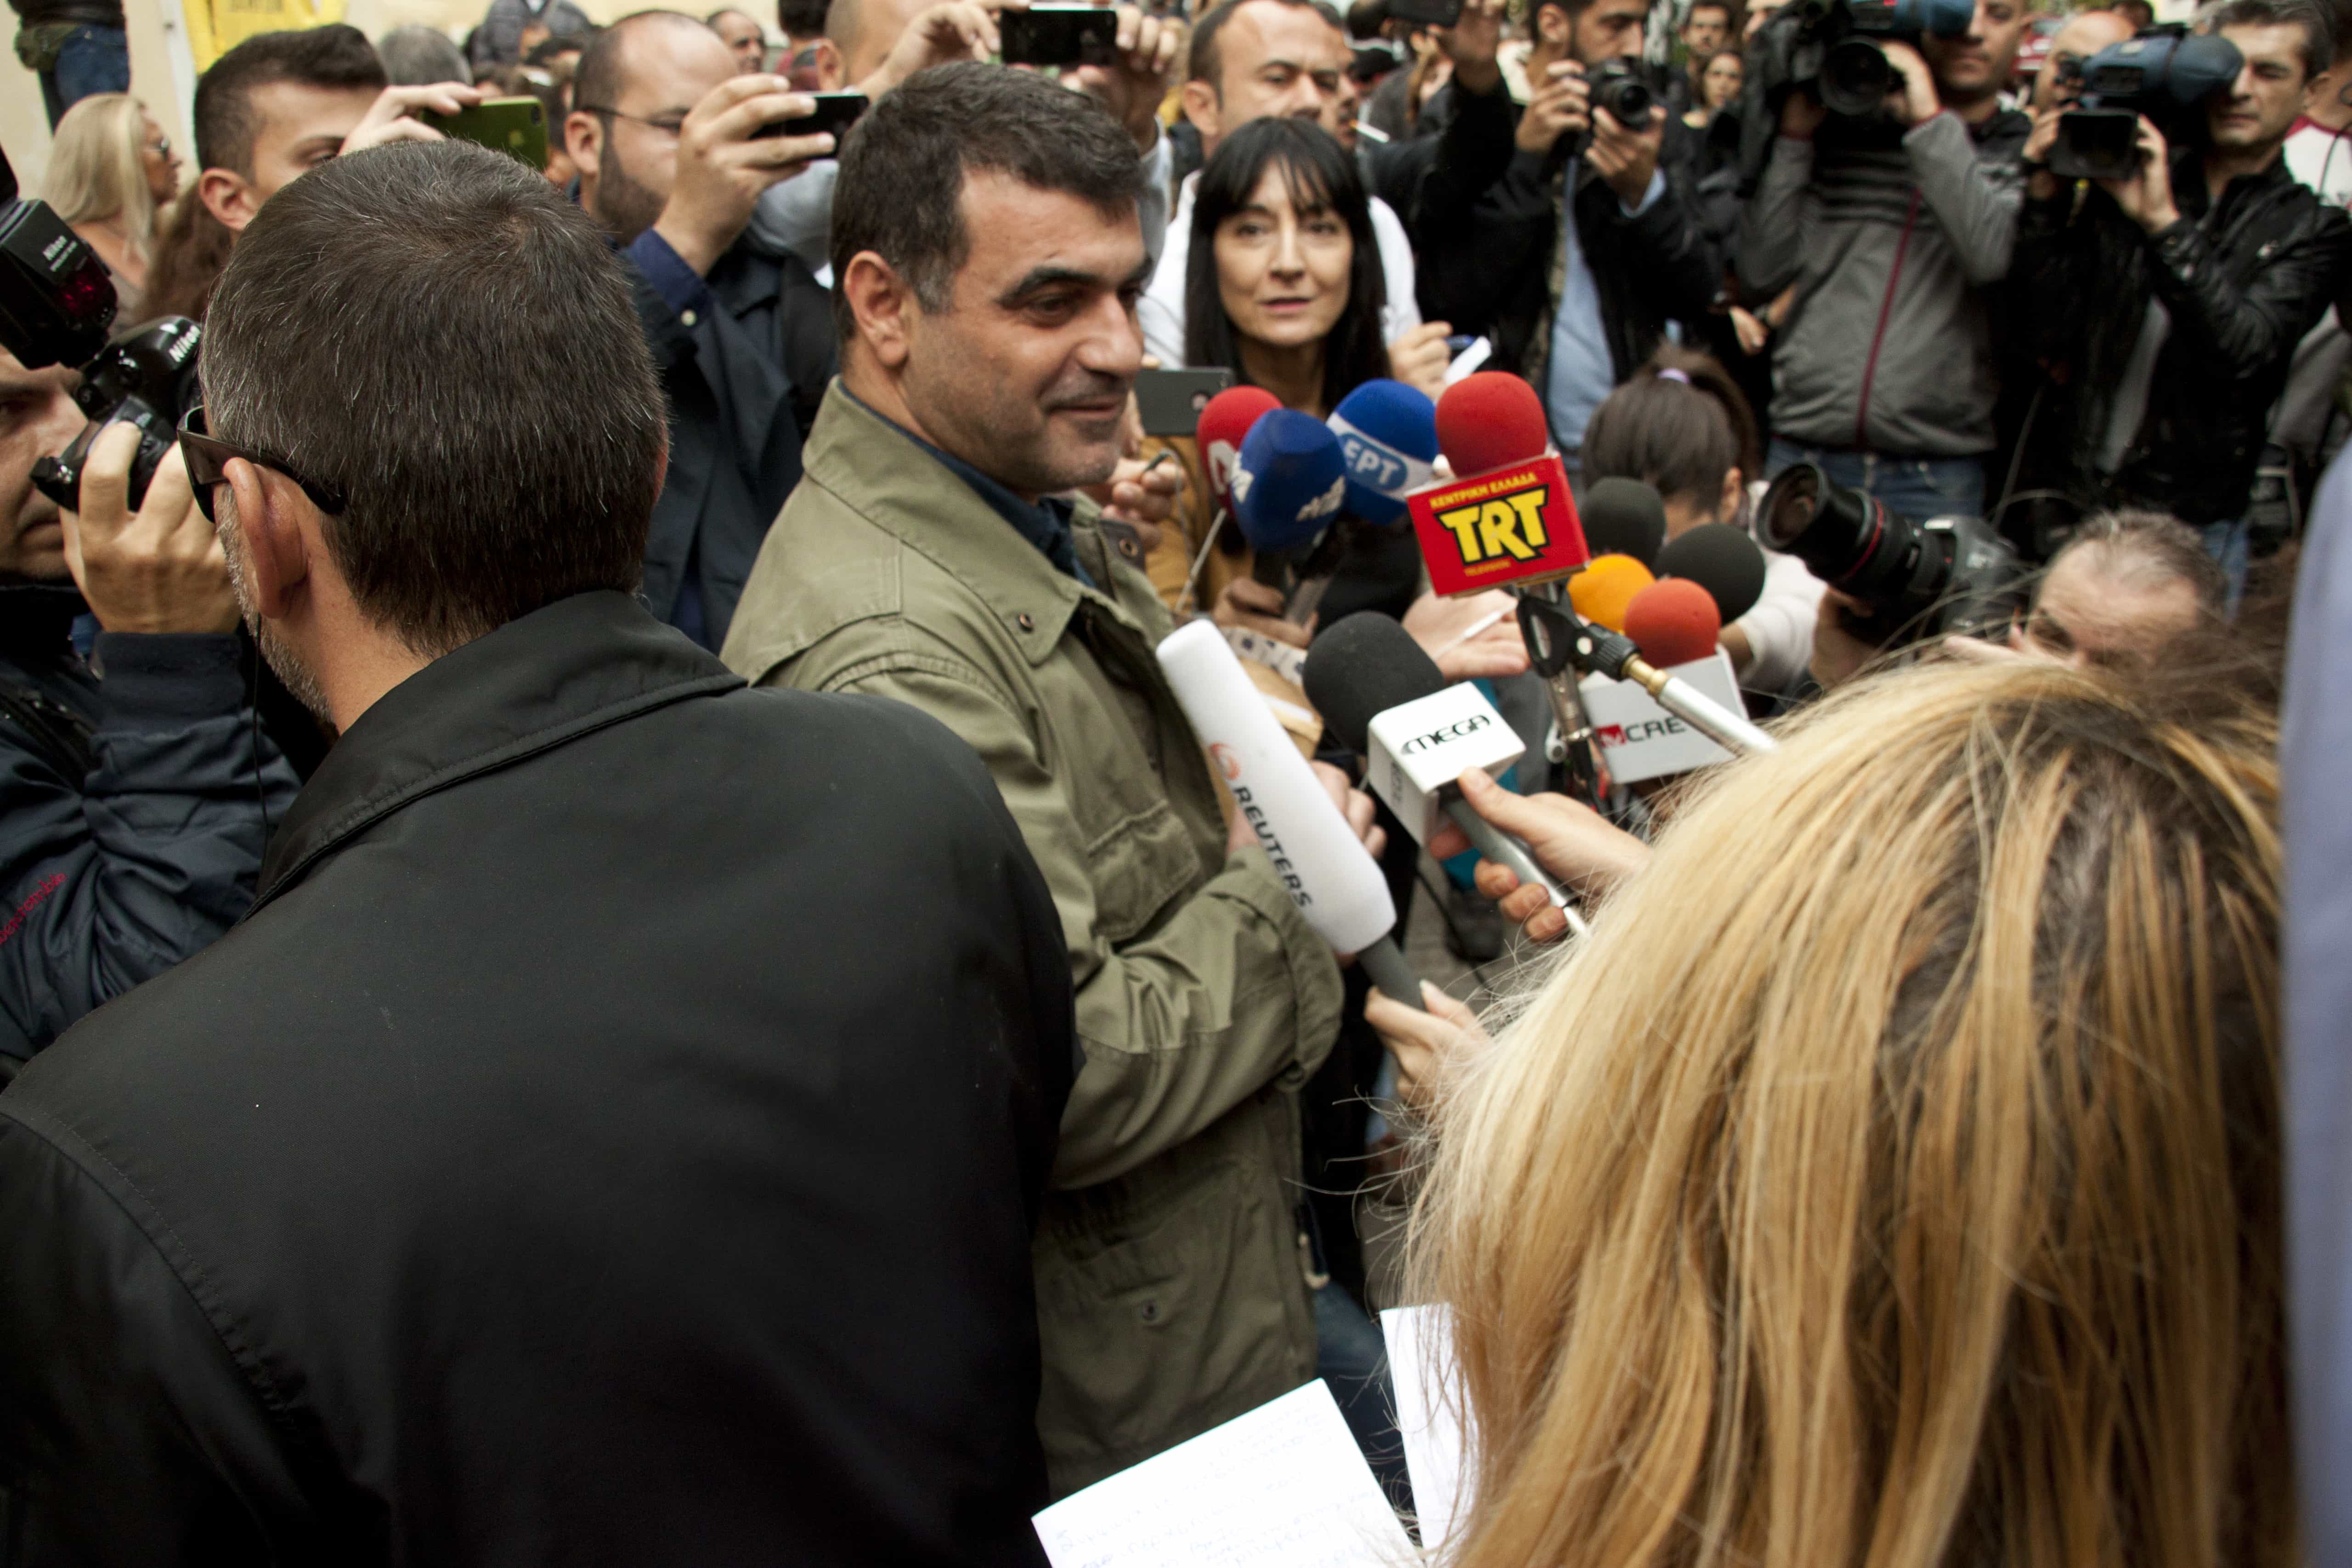 Investigative journalist Kostas Vaxevanis talks to the press after being released from police custody, Demotix